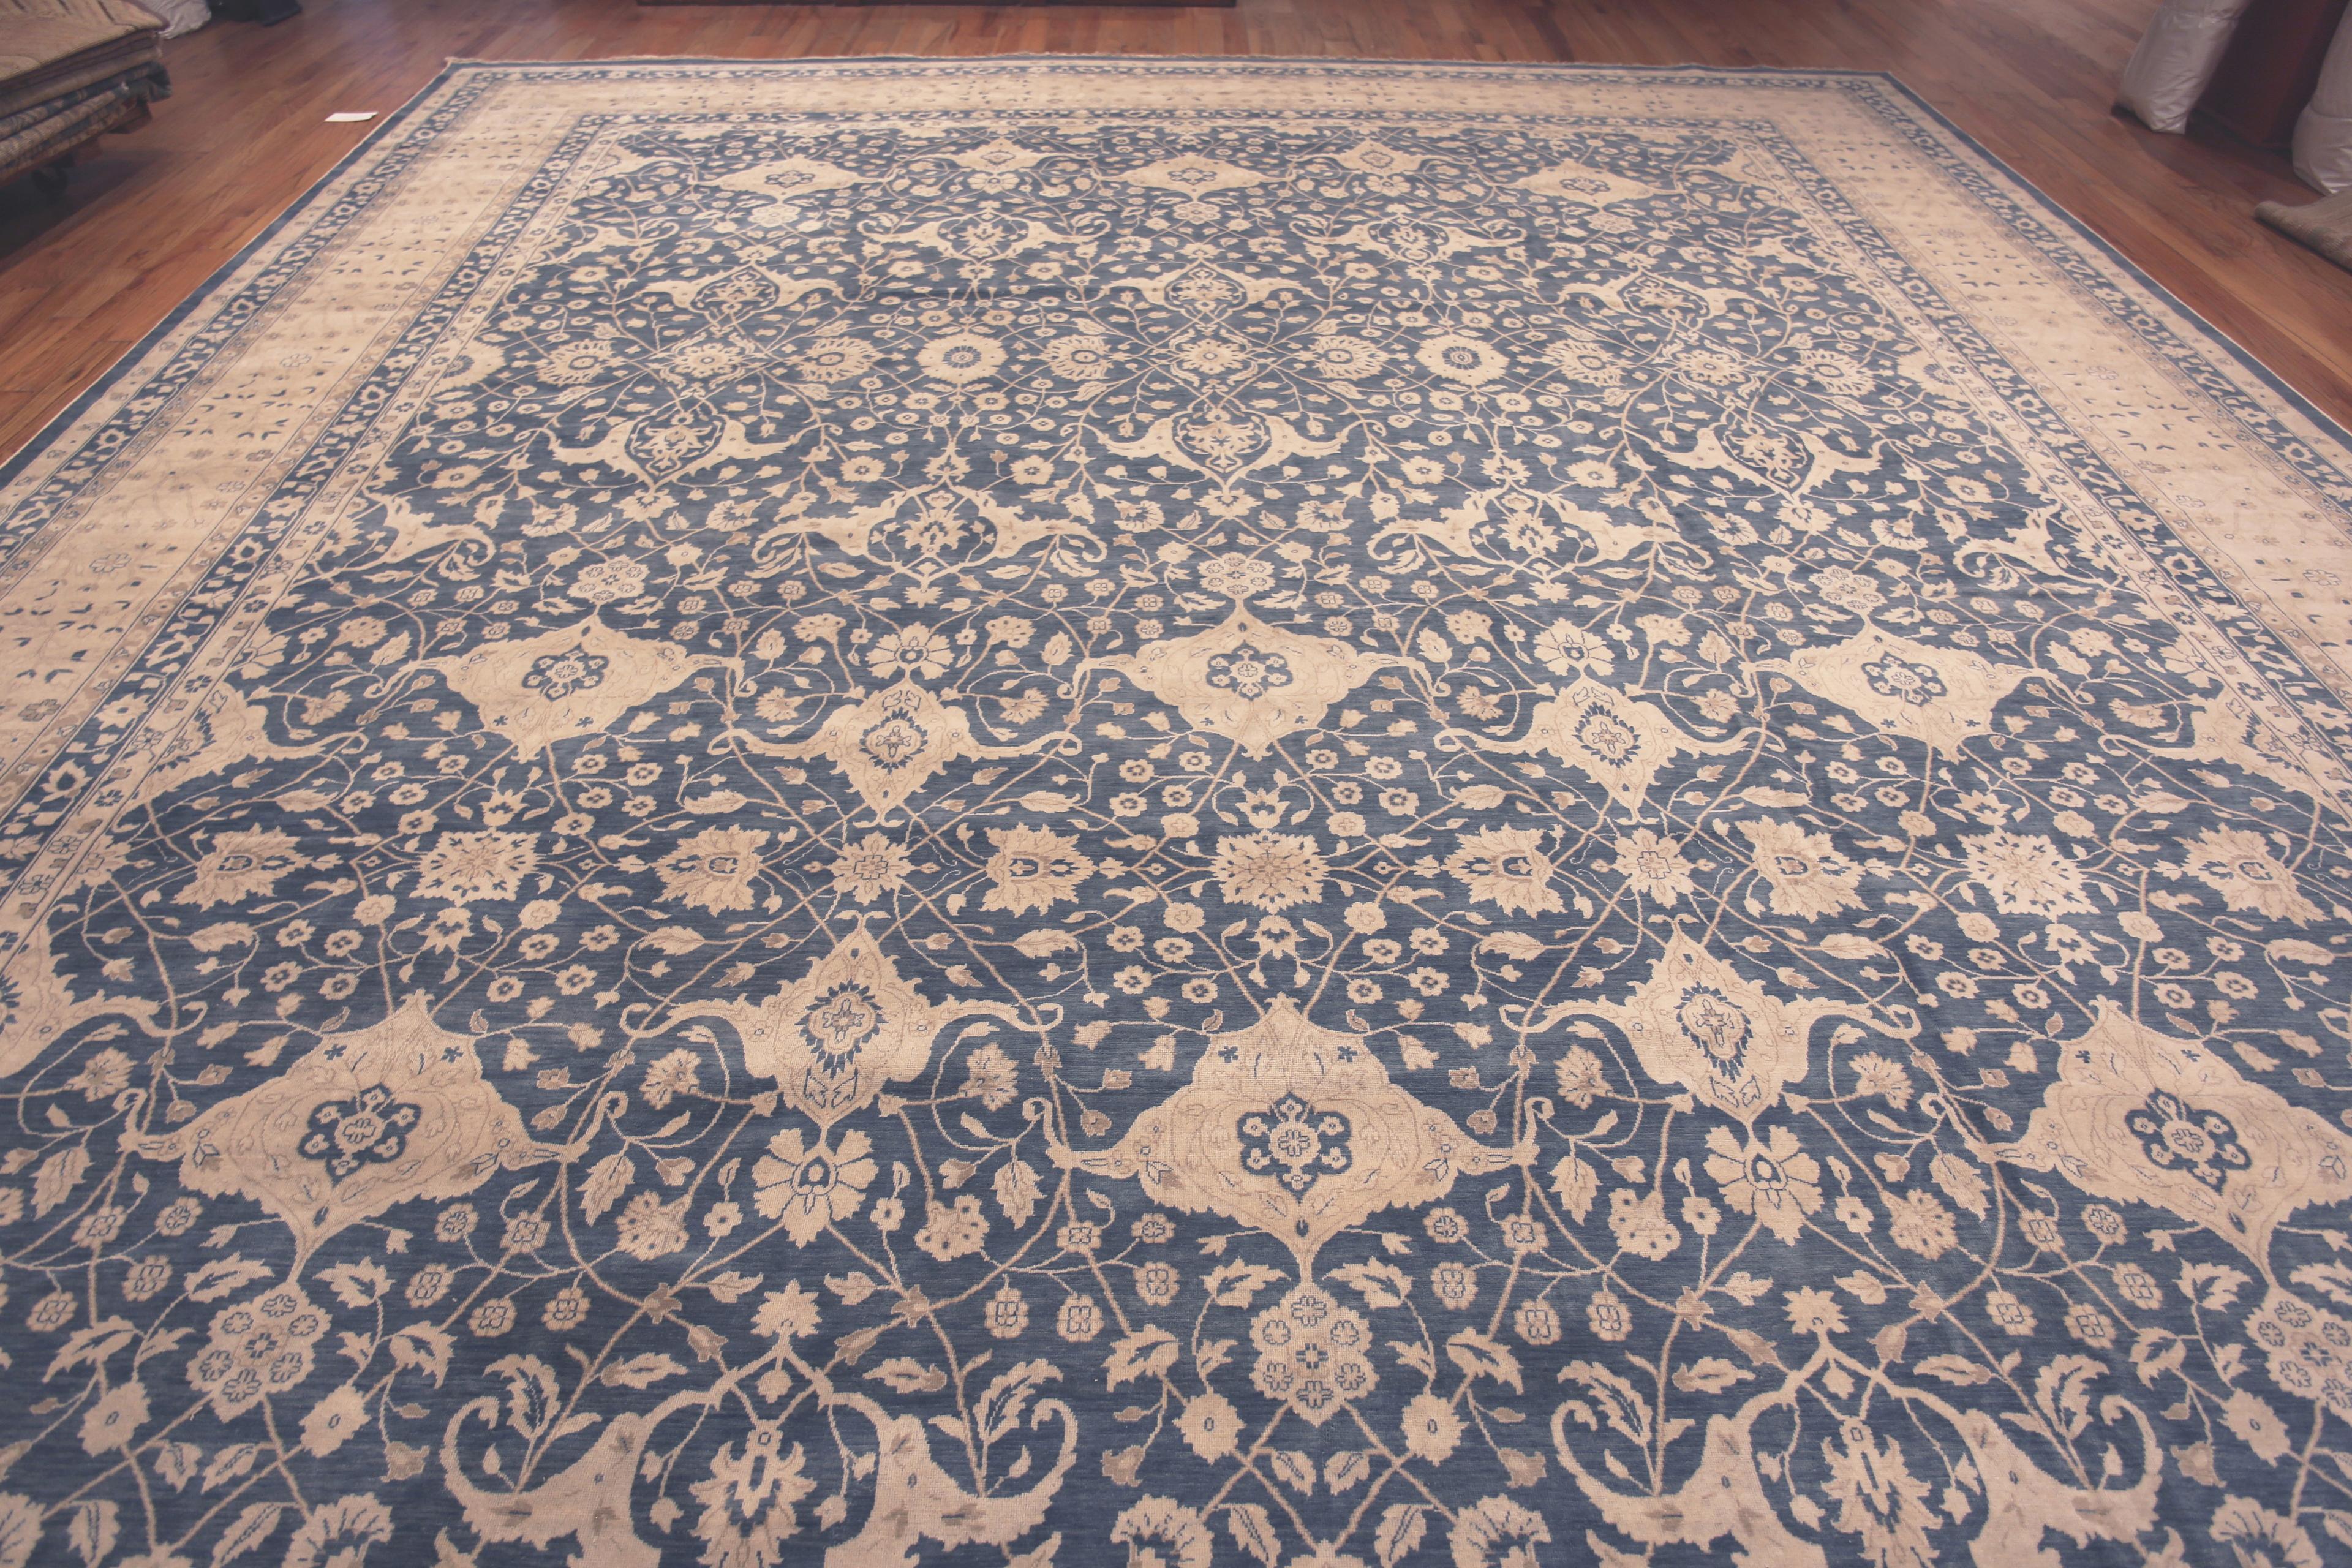 Oversized Modern Indian Agra Rug, Country of Origin: Modern India Rugs. Circa date: Modern. Size: 15 ft x 24 ft 9 in (4.57 m x 7.54 m)